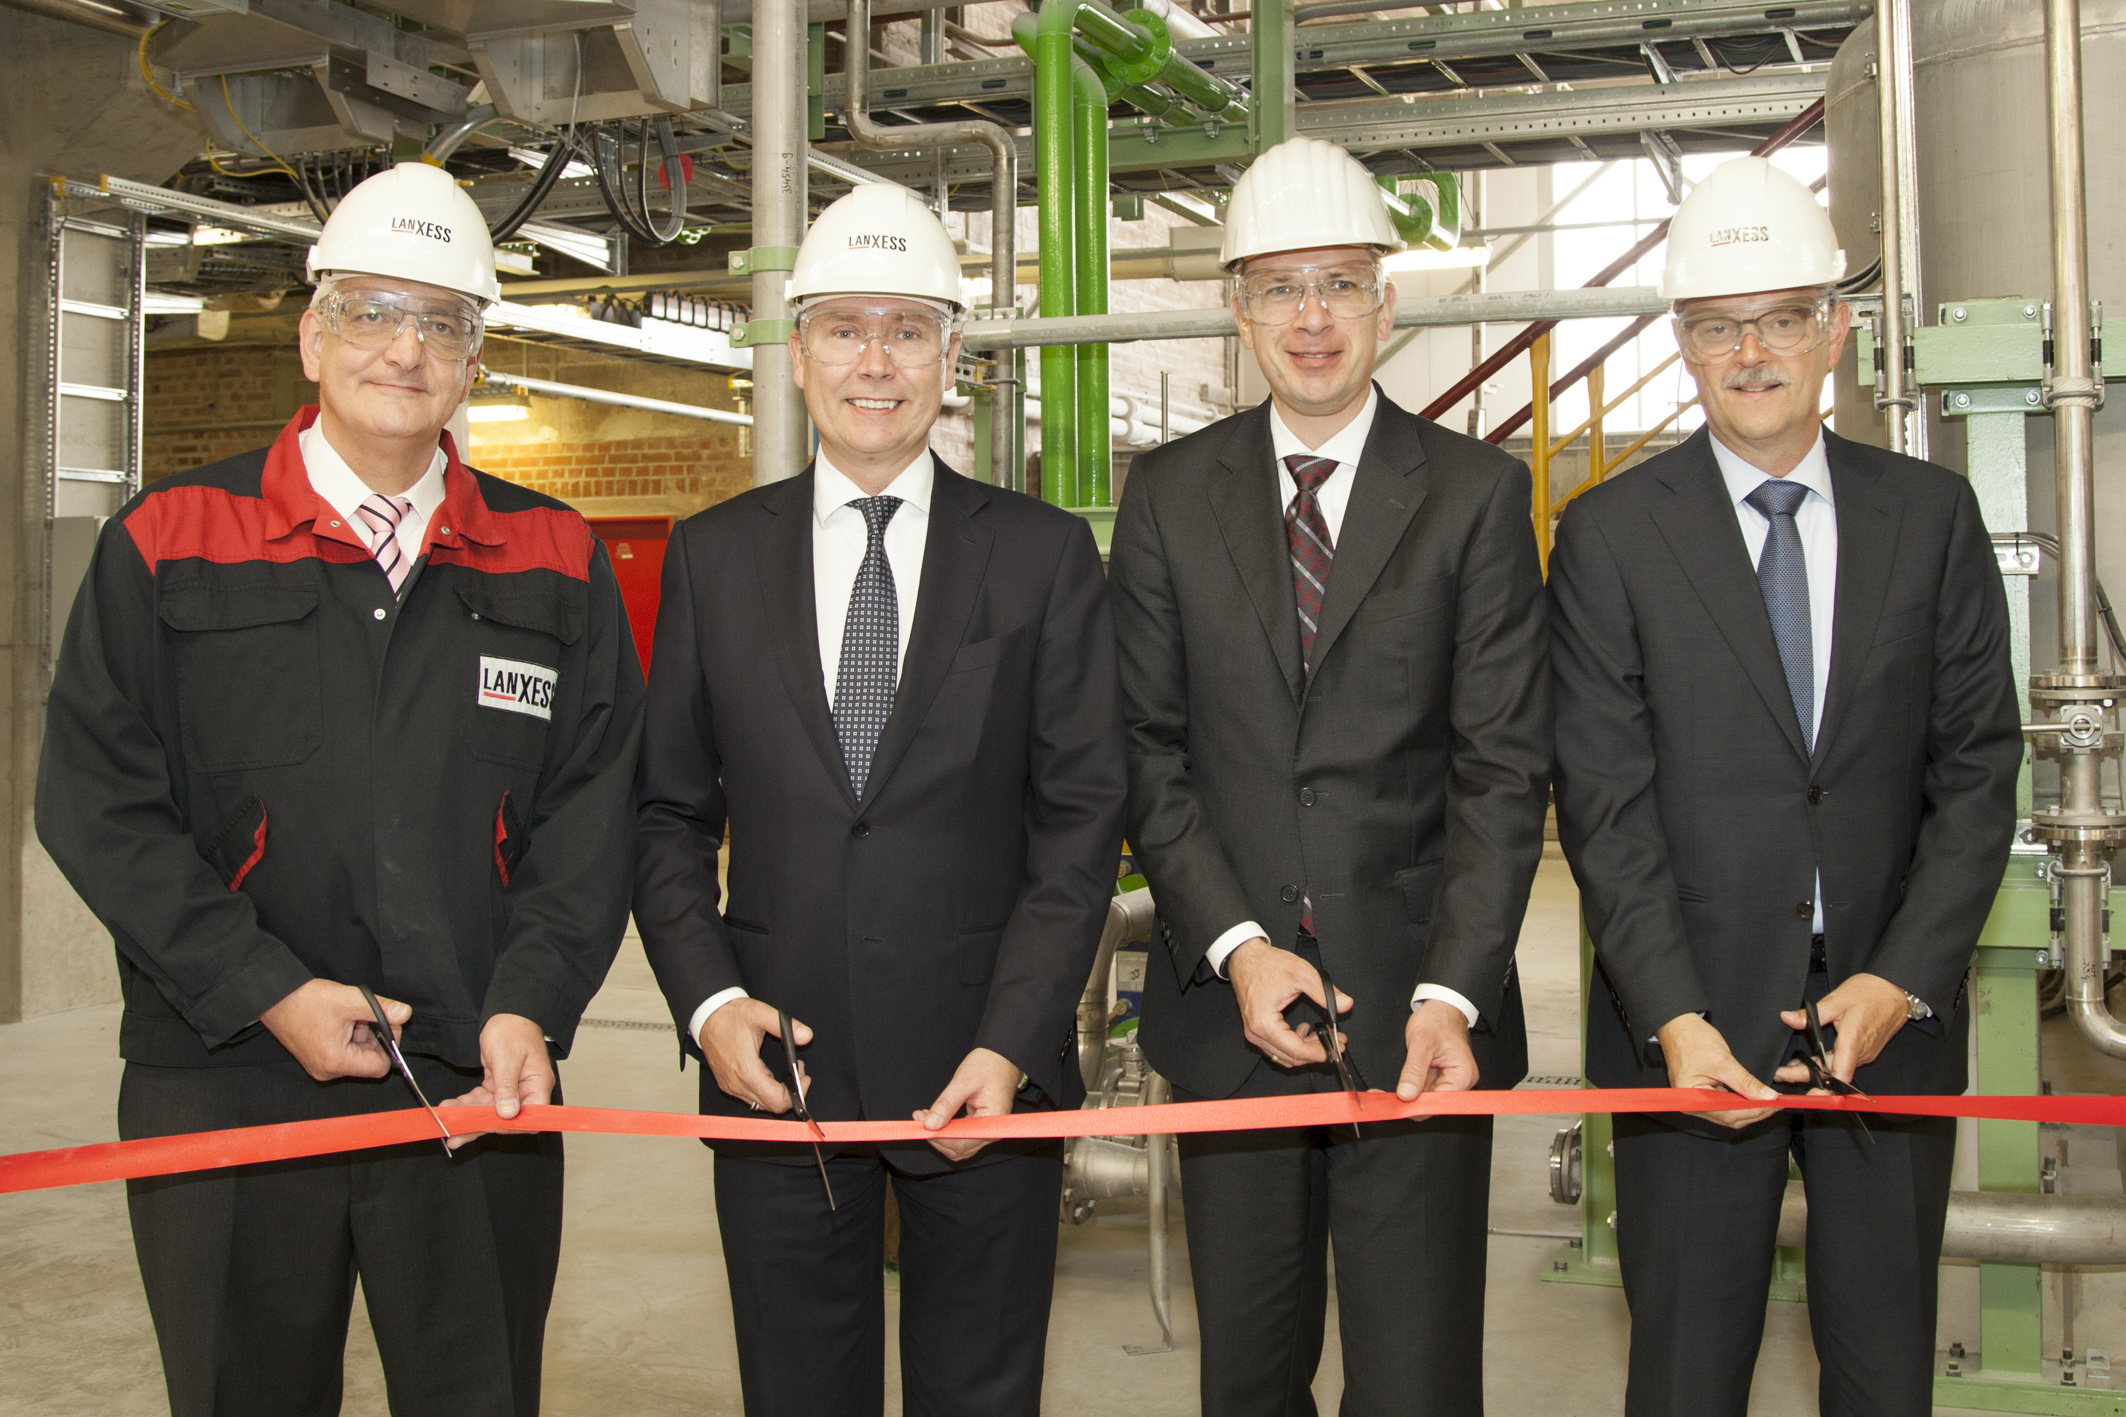 Official inauguration of the new production line for Chloroprene Rubber in Dormagen, Germany: (from left) Ralf Tappe, Site Manager, Board member Werner Breuers, Stefan Rittmann, Head of Business Line Chloropren Rubber, Jan Paul de Vries, Head of High Performance Elastomers business unit. Photo: LANXESS AG